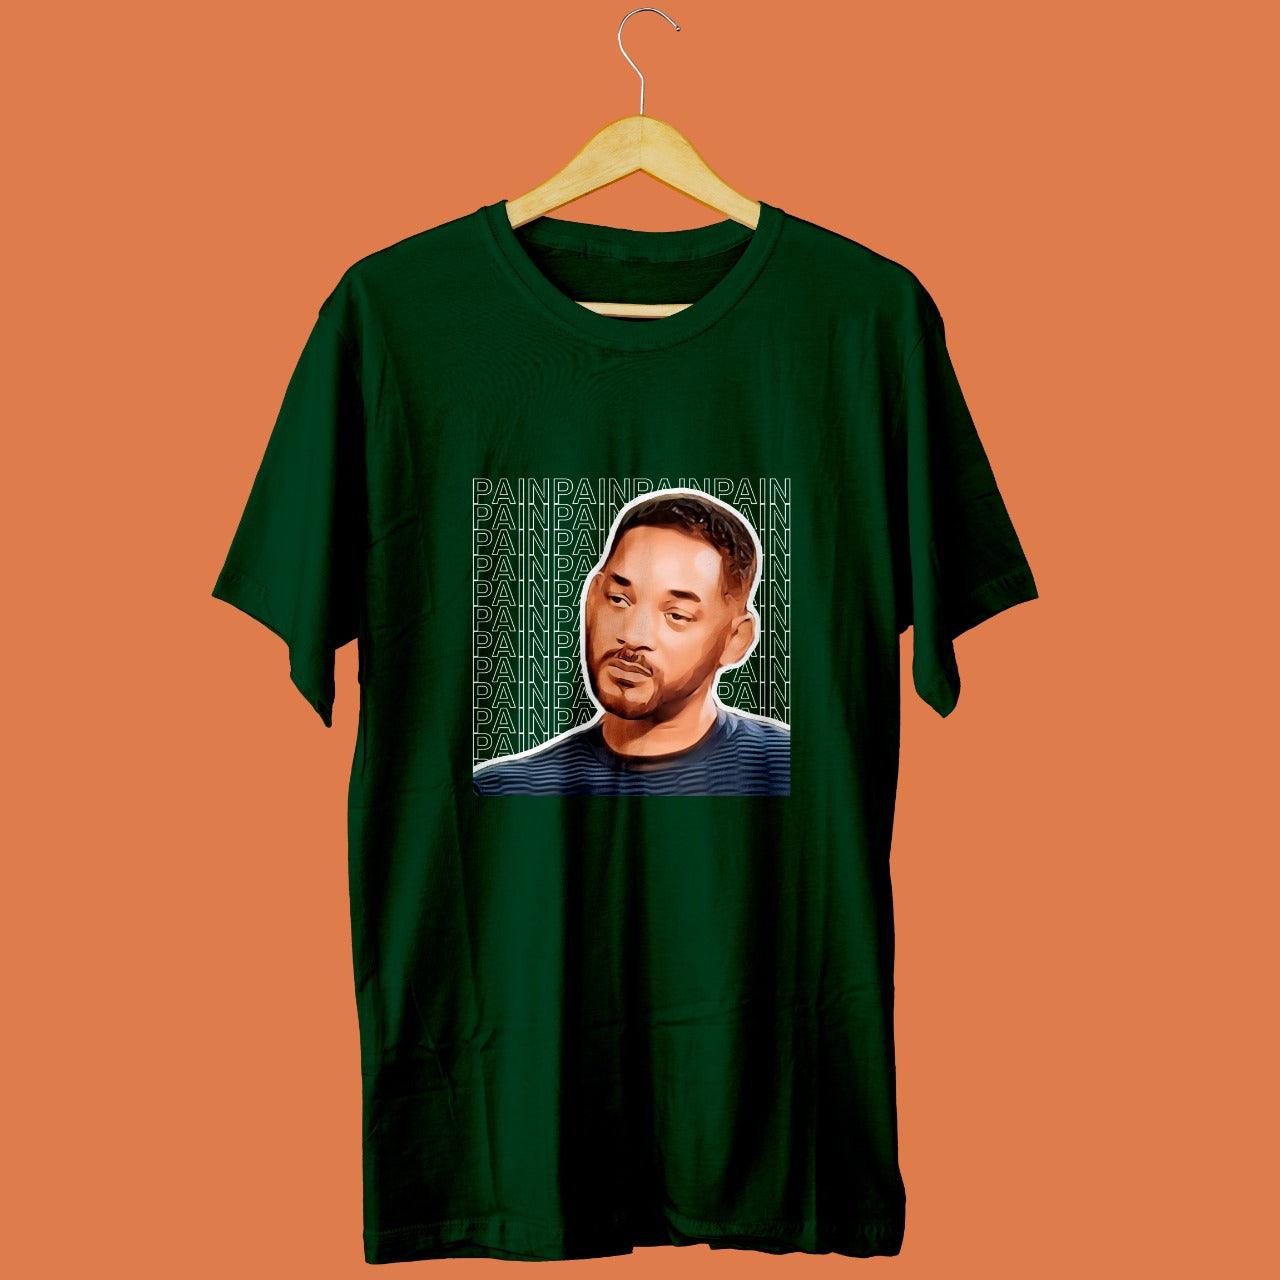 dark green tshirt with picture of sad will smith printed on it with pain written multiple times in the background, relatable memes